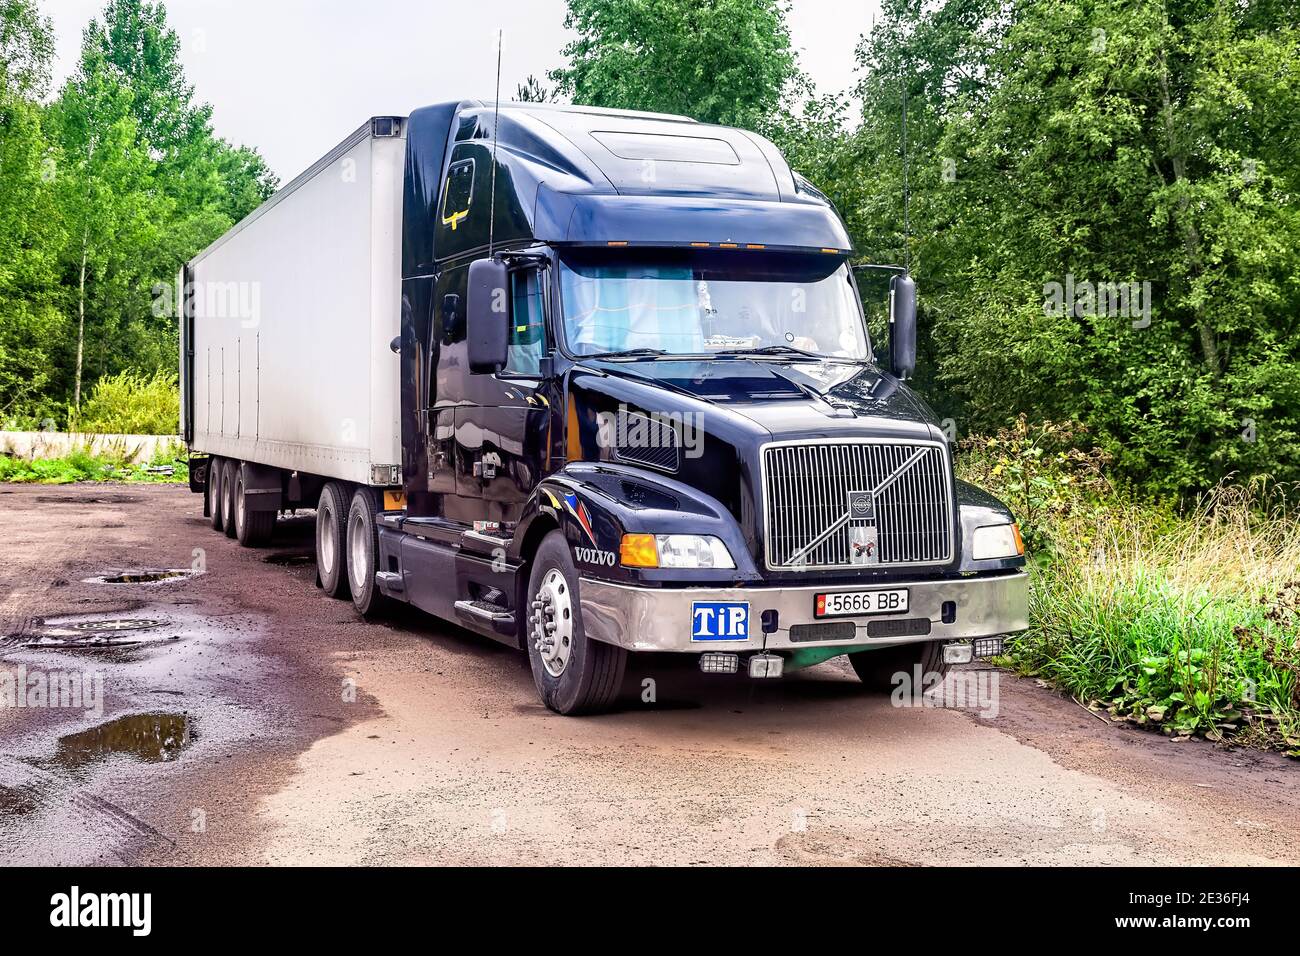 Novgorod, Russia - August 10, 2013: Volvo heavy truck vehicle parked up at the parking lot Stock Photo